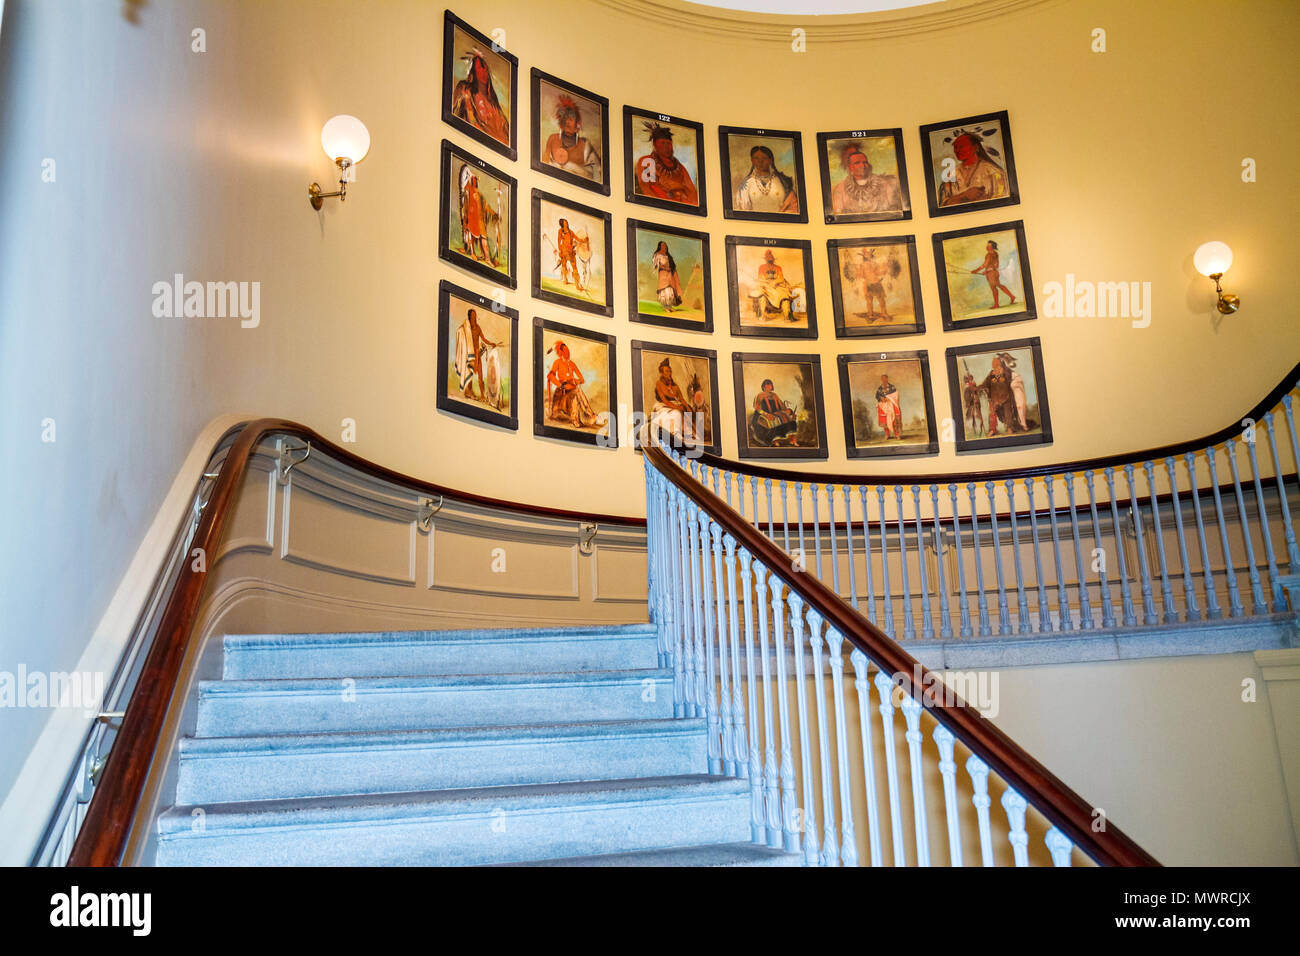 Washington DC,National Portrait Gallery,Donald W,Reynolds Center for American Art & Portraiture,stairs,curve,banister,Native American Indian indigenou Stock Photo